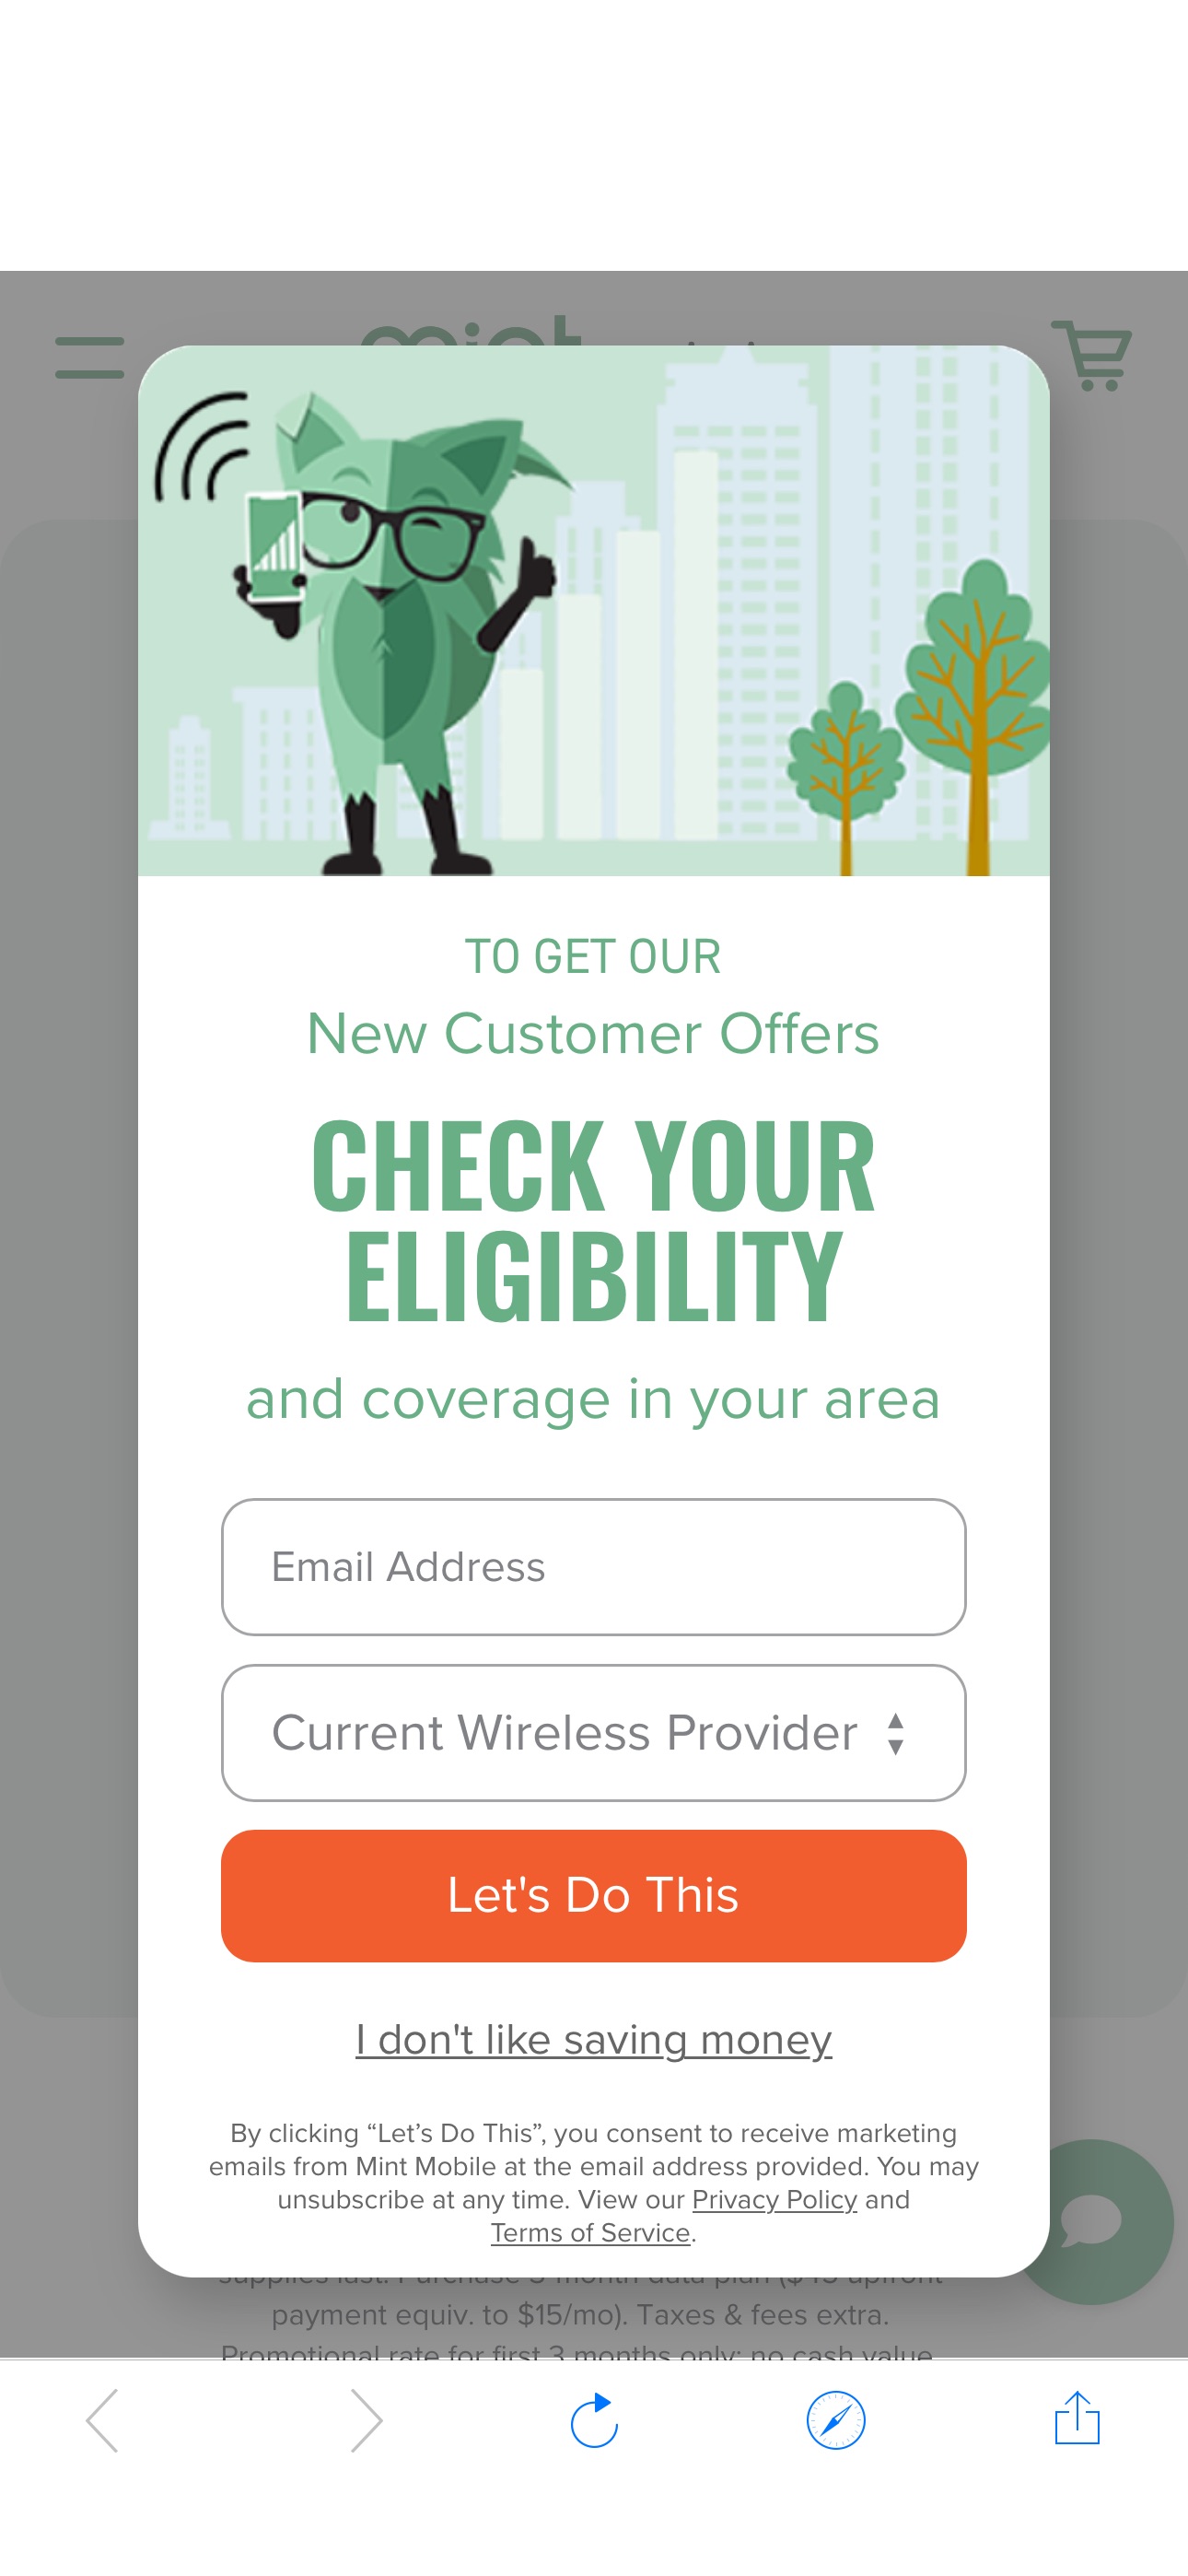 Mint Mobile | Wireless that's Easy, Online, $15 Bucks a Month